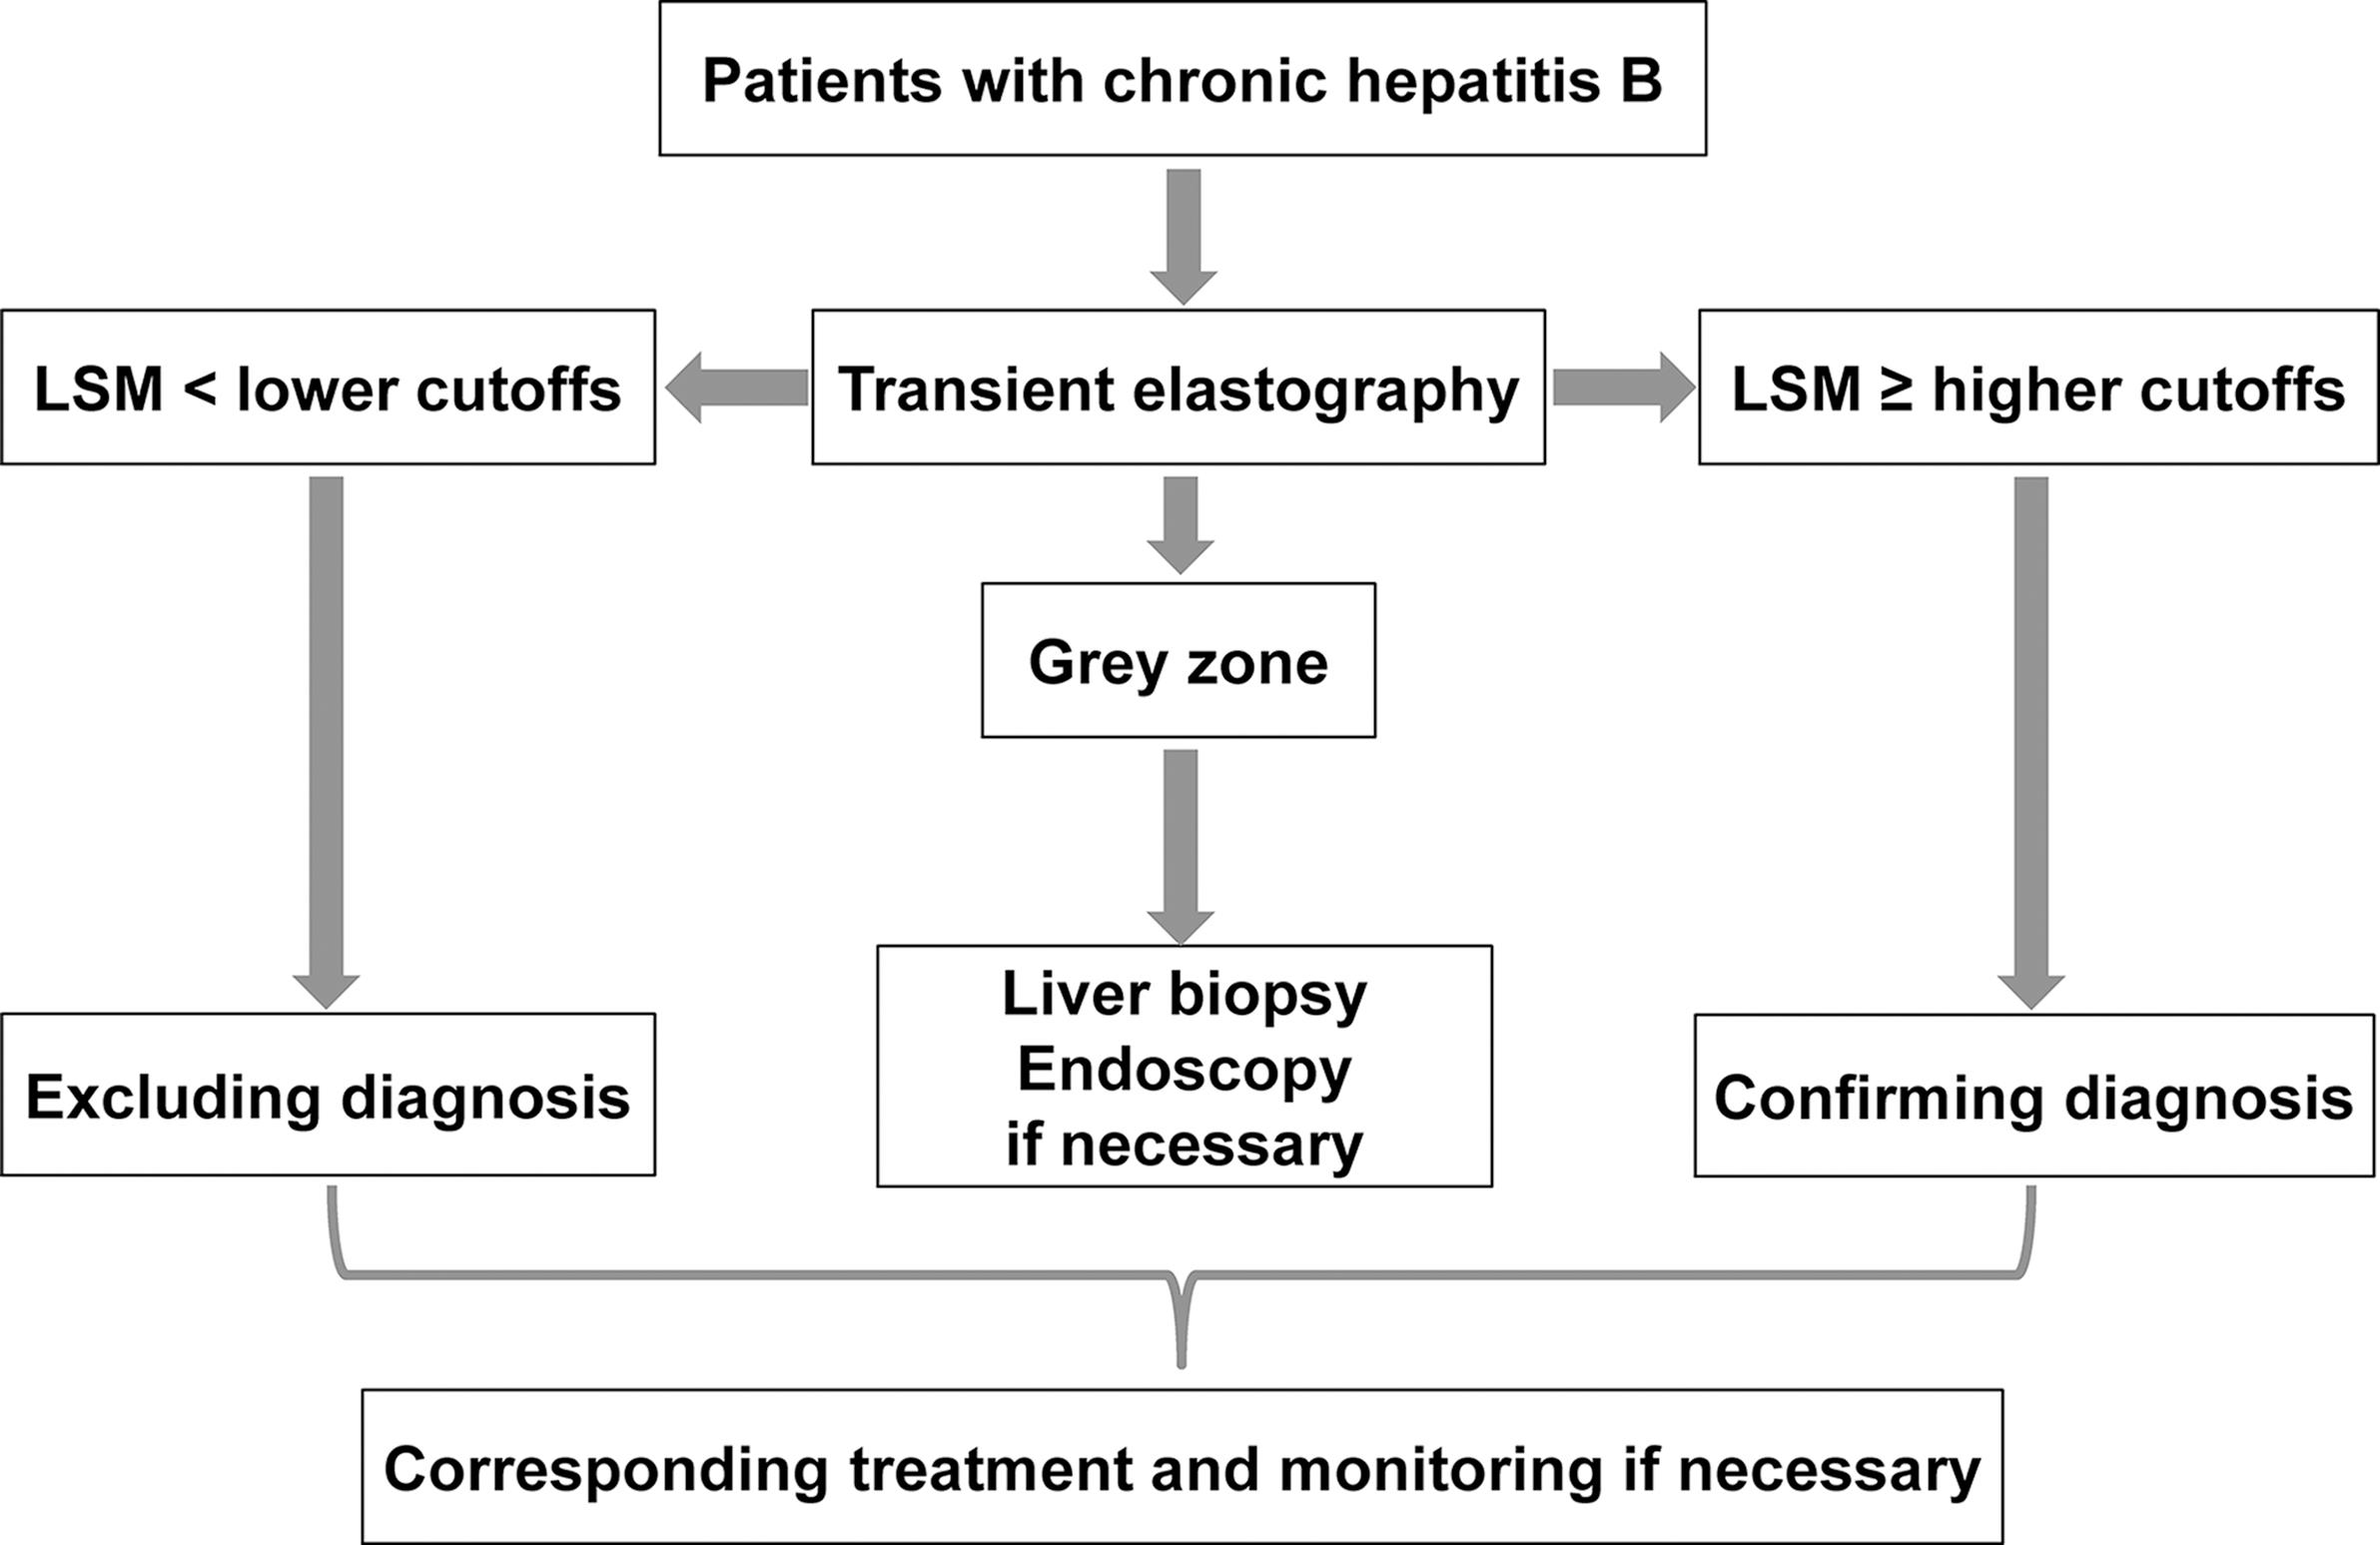 Algorithm and schematic diagram for the adjuvant application of liver stiffness measurement (LSM) by vibration controlled transient elastography for non-invasive diagnosis of liver fibrosis/cirrhosis and portal hypertension in patients with chronic hepatitis B.